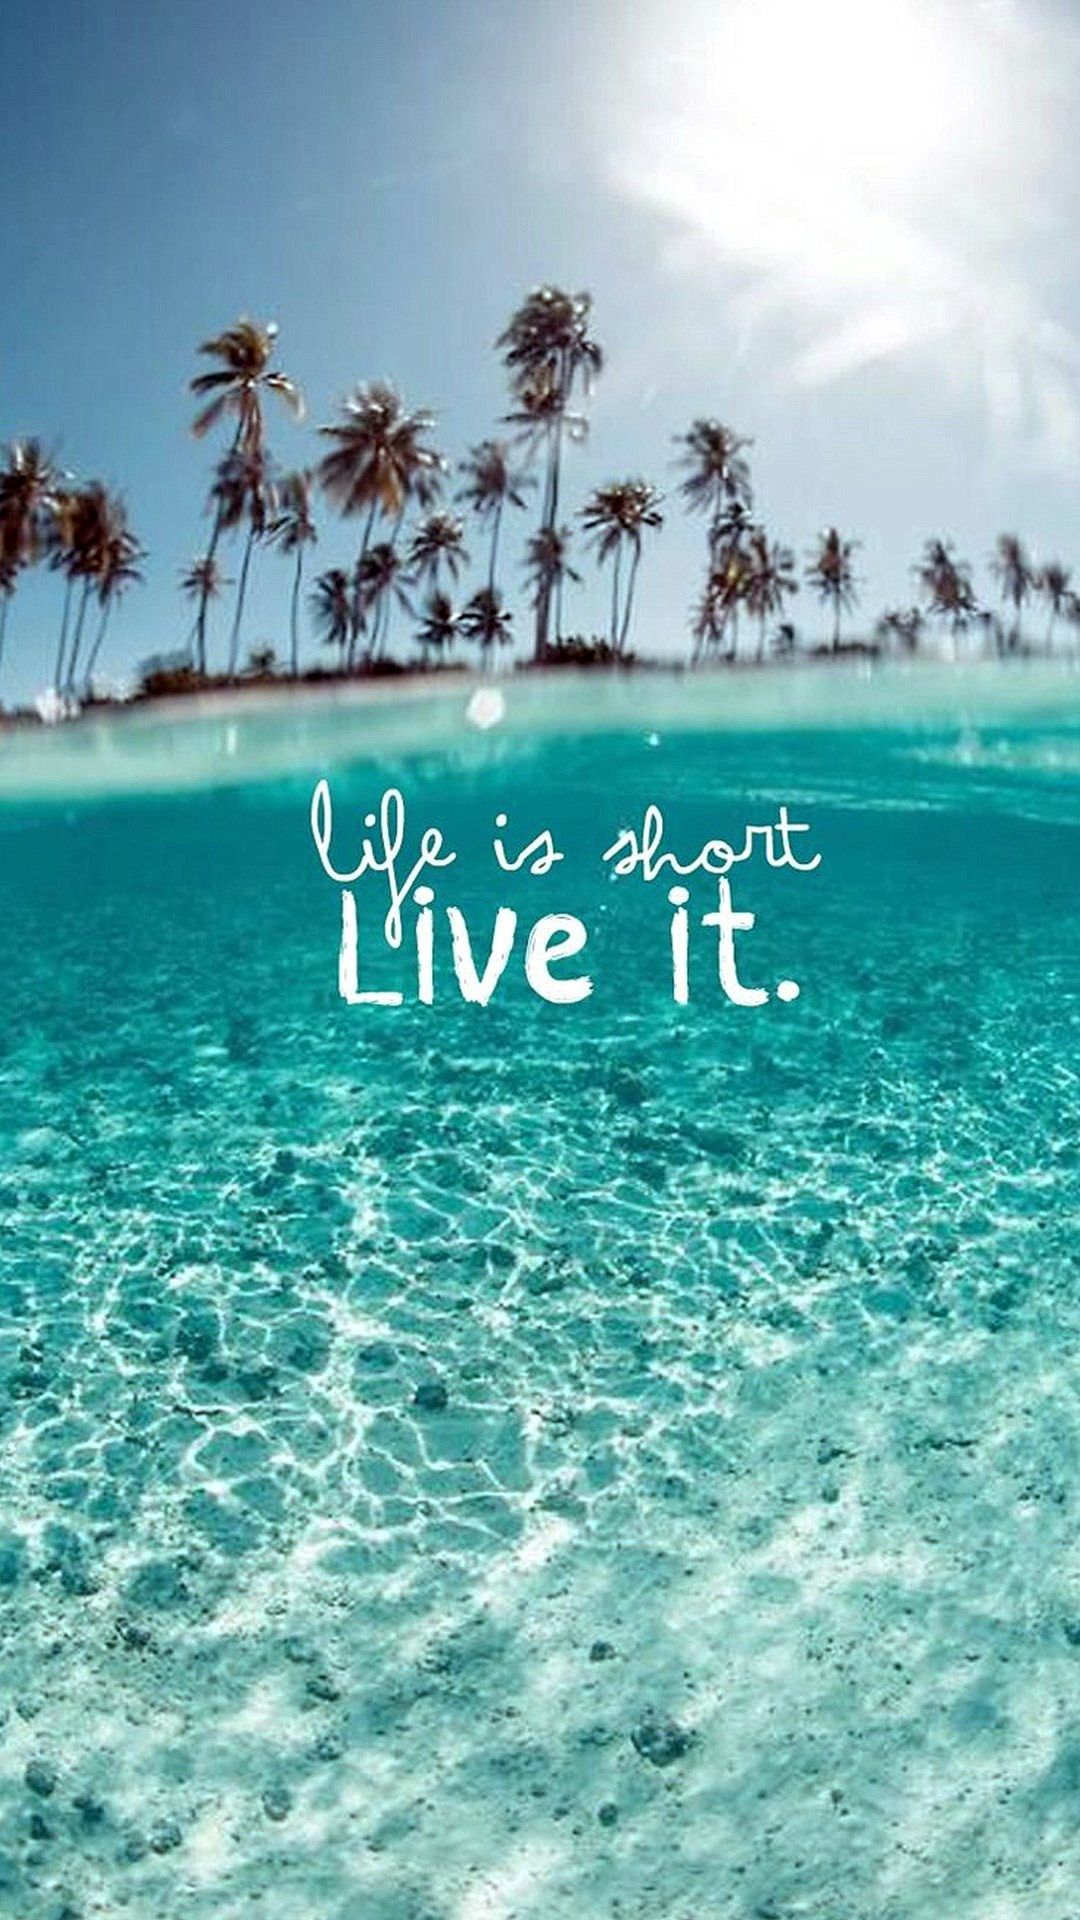 Live it - Tap to see more inspirational quotes wallpapers to inspire ...